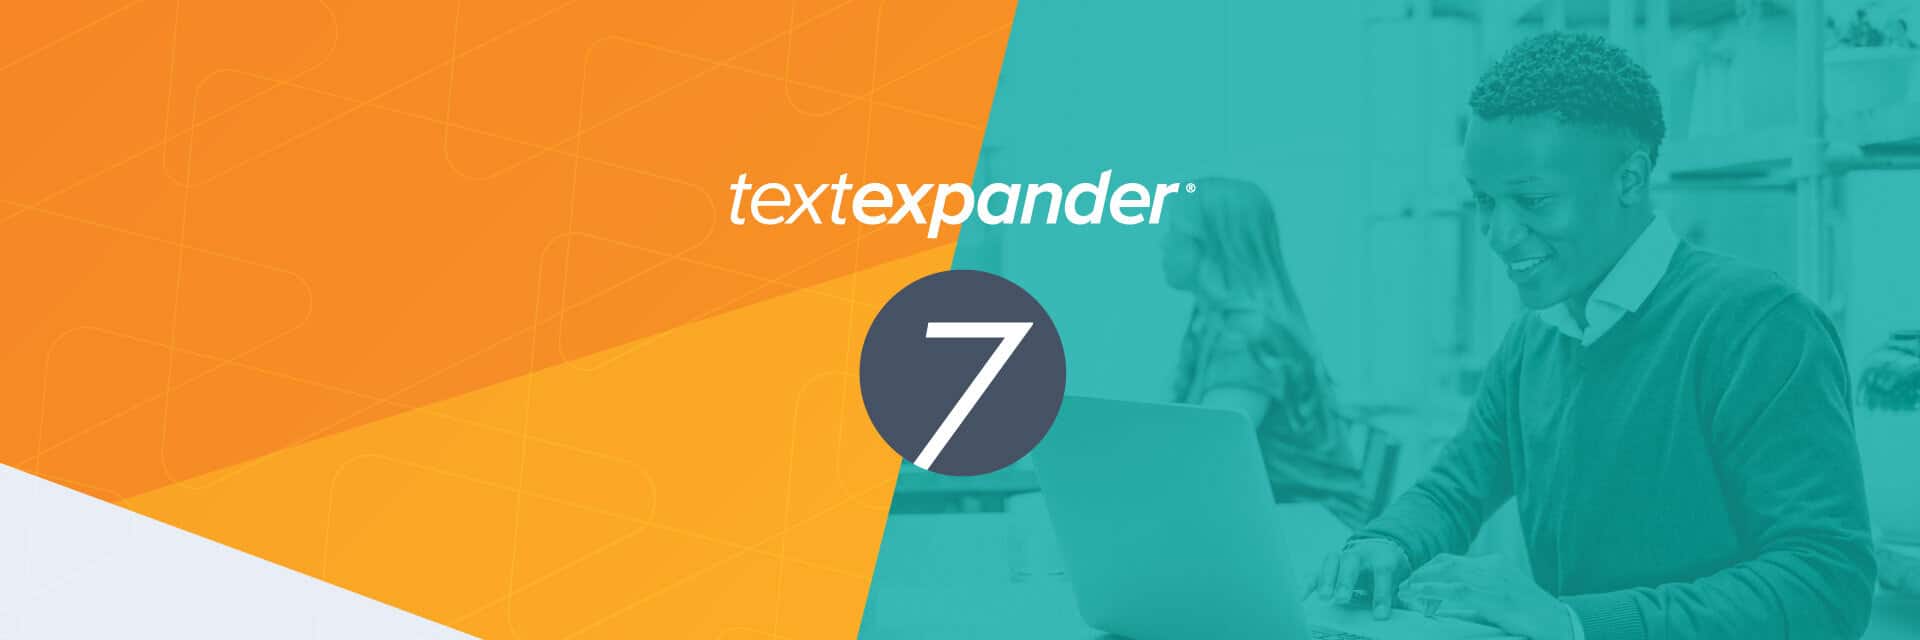 What's New in TextExpander 7.0